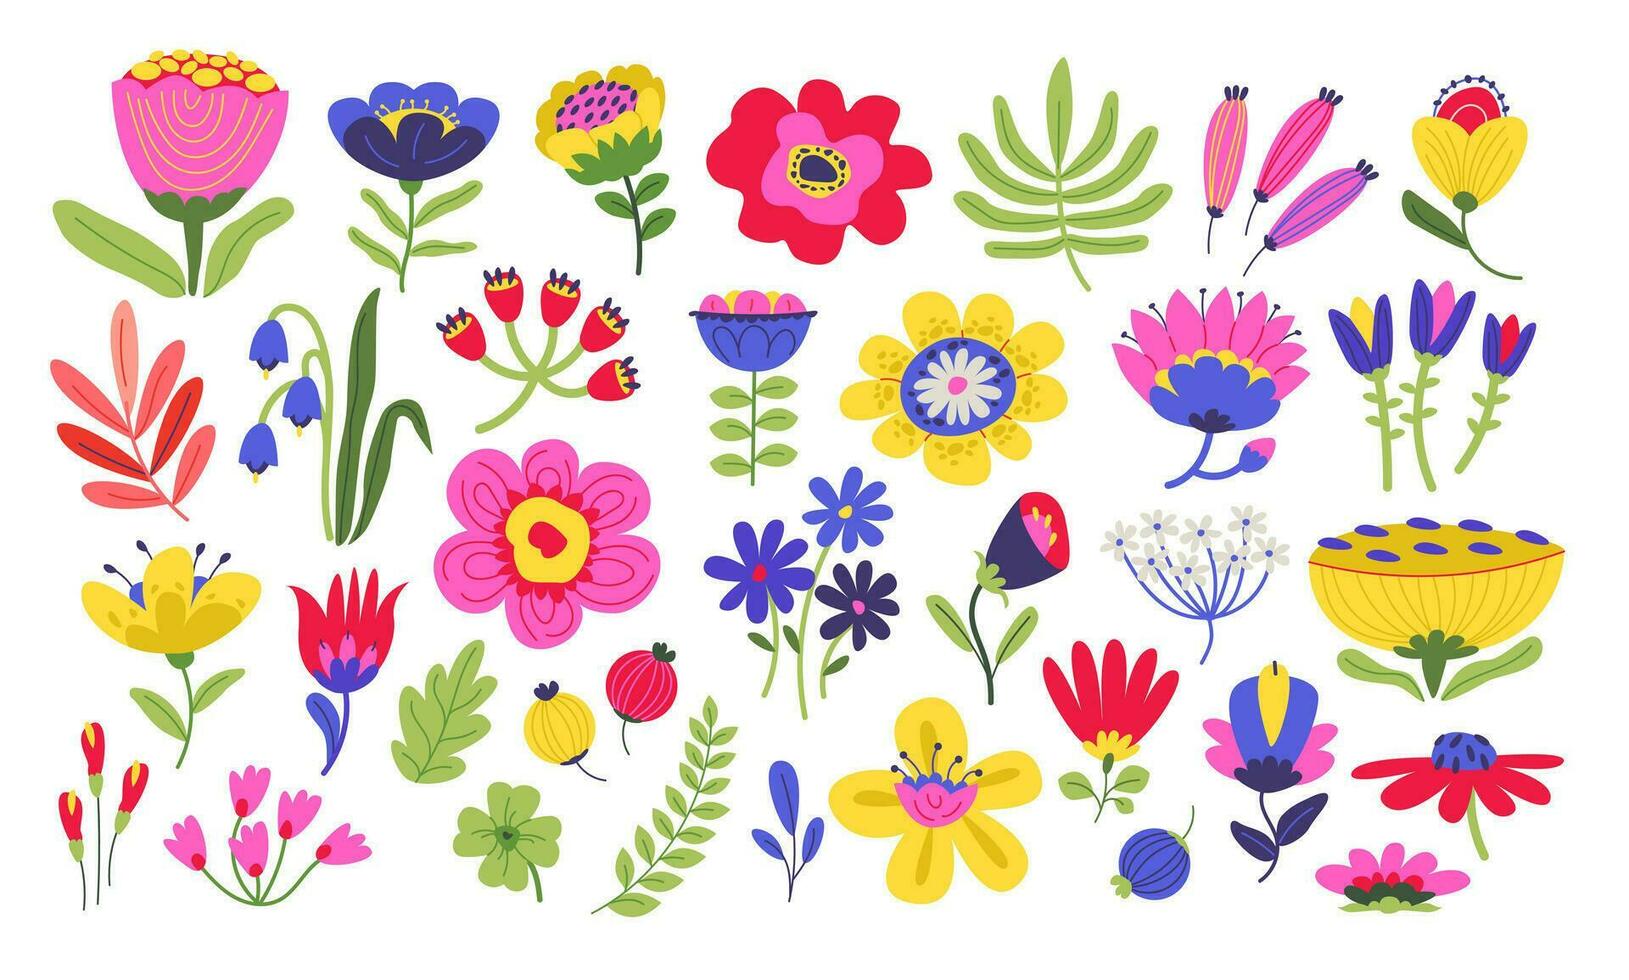 Naive Abstract plants and flowers collection. Hand-drawn colorful flowers. Flat vector illustration in the style of a doodle.